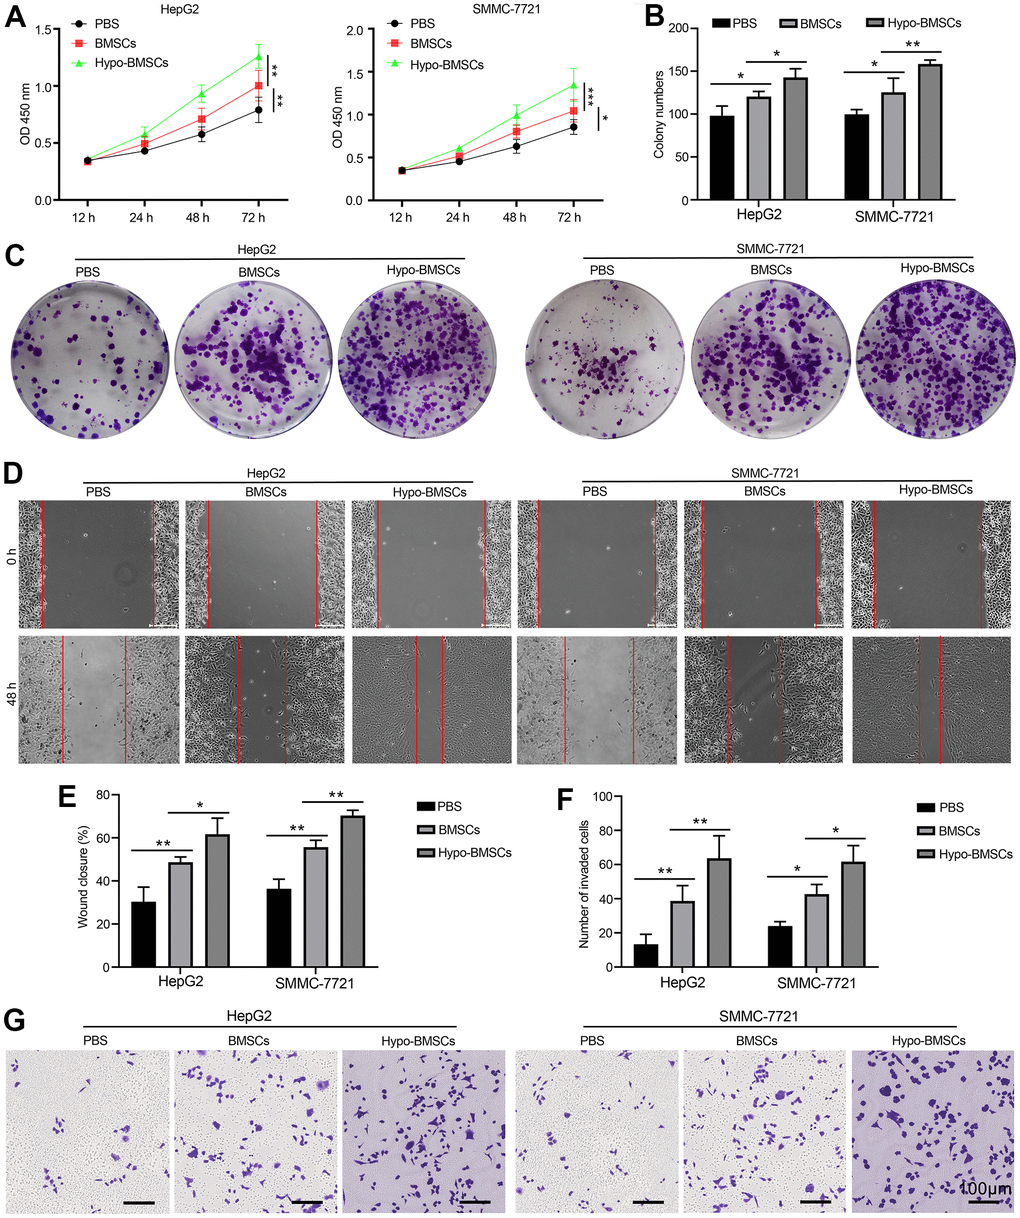 Hypoxic BMSCs co-culture promotes HCC cells proliferation and metastasis in vitro. (A) Proliferation of HepG2 and SMMC-7721 cells determined by CCK-8 after co-culturing with BMSCs or hypo-BMSCs, Data were presented as the mean ± SD, and analyzed with Student’s t-test. *P B) The numbers of colony were counted from six fields of view in each group. Data were presented as the mean ± SD, and analyzed with Student’s t-test. *P C) Colony formation assays showed that the proliferation rate was increased in HepG2 and SMMC-7721 cells after co-culturing with BMSCs or hypo-BMSCs. (D) Cell migration was measured by wound healing assay. The increased migration capability induced by hypoxic BMSC-secreted exosomes. (E) The distance of migration was measured from six fields of view in each group. Data were presented as the mean ± SD, and analyzed with Student’s t-test. *P F) The numbers of dot violet were counted from six fields of view in each group. Data were presented as the mean ± SD, and analyzed with Student’s t-test. *P G) Cell invasion were measured by transwell assays. HepG2 and SMMC-7721 cells co-culturing with BMSCs or hypo-BMSCs for 48 h. Cells that invaded to the bottom surface were stained with crystal violet and observed by light microscopy (magnification, 10×).